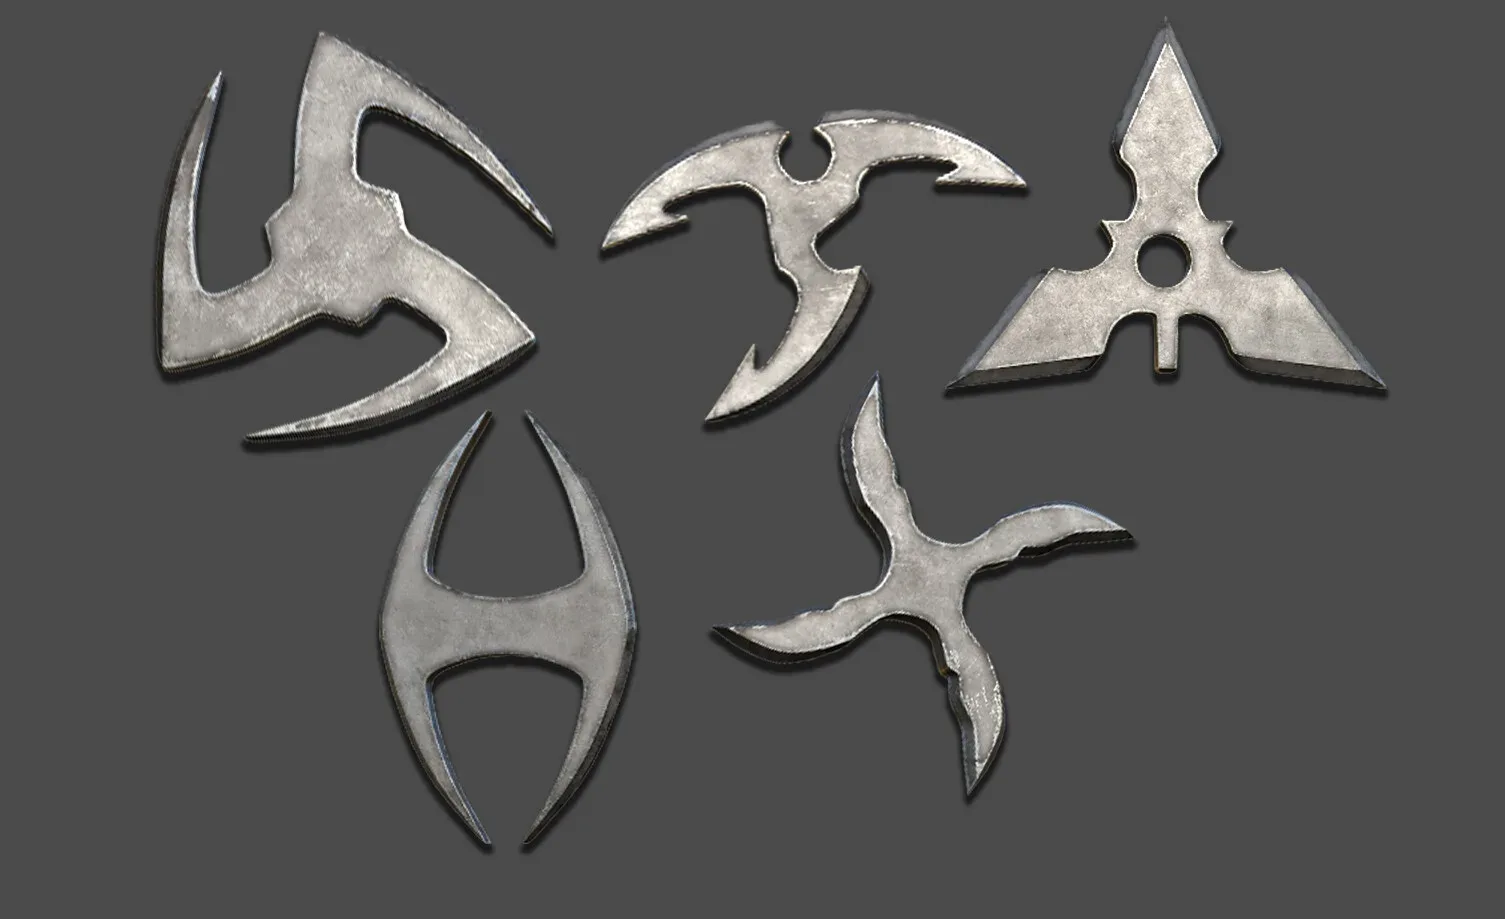 25 Shuriken Models Lowpoly and Highpoly (with UV) , IMM Brush Vol.3